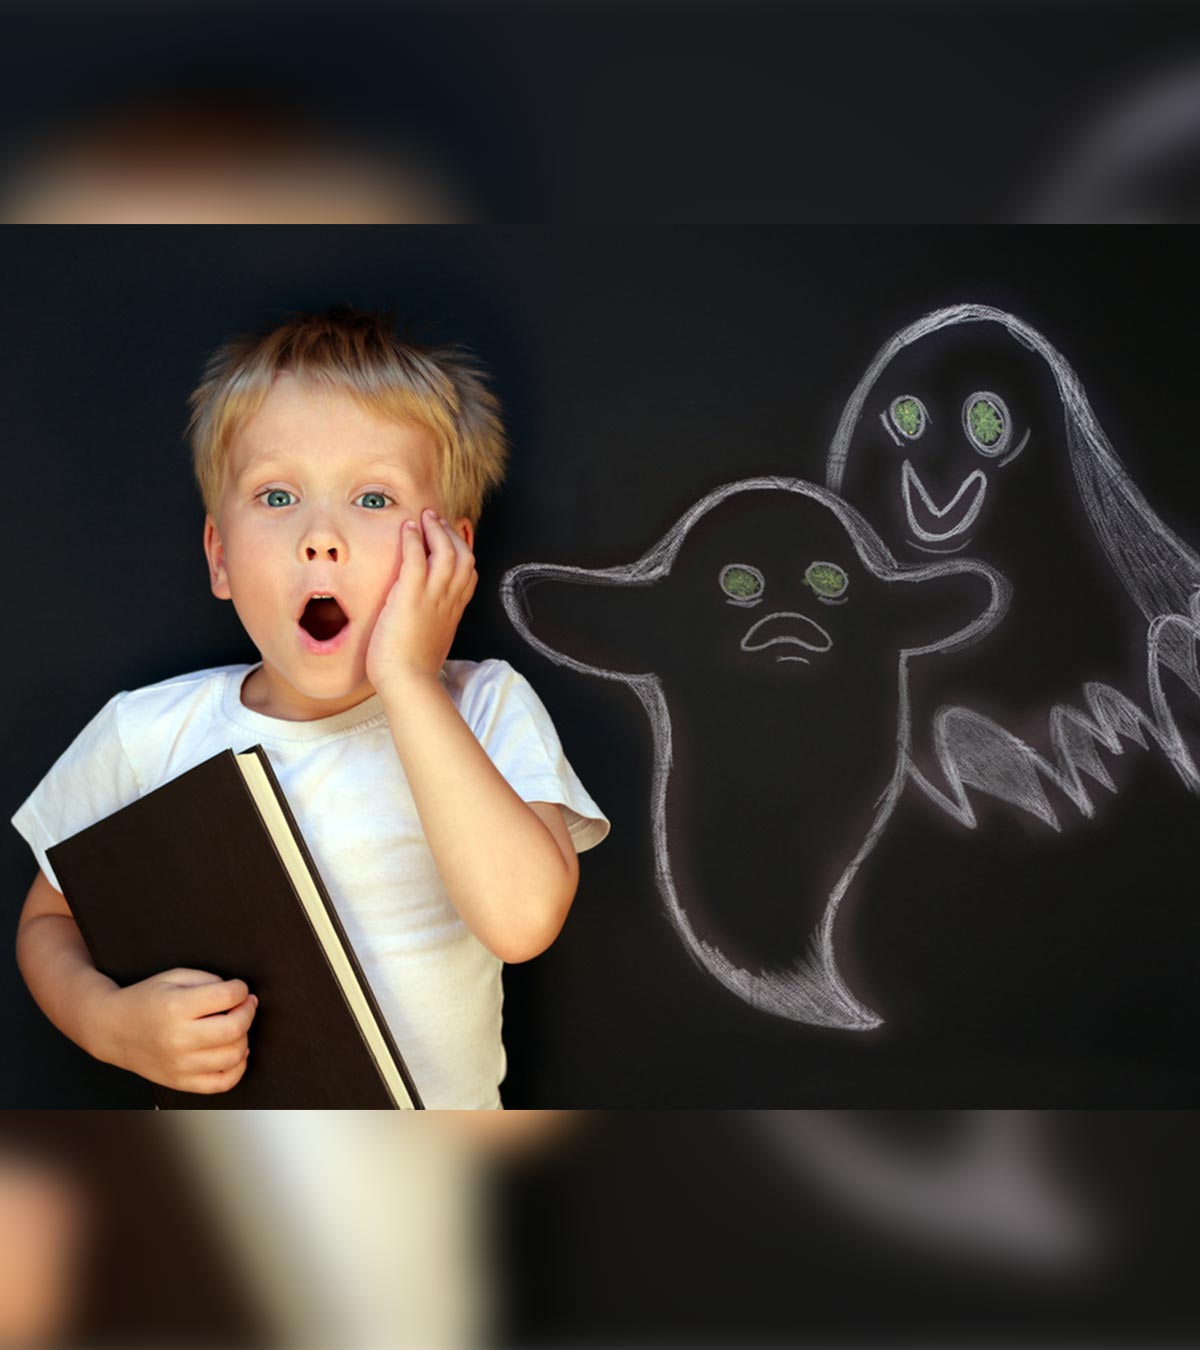 20 Short And Scary Ghost Stories For Children